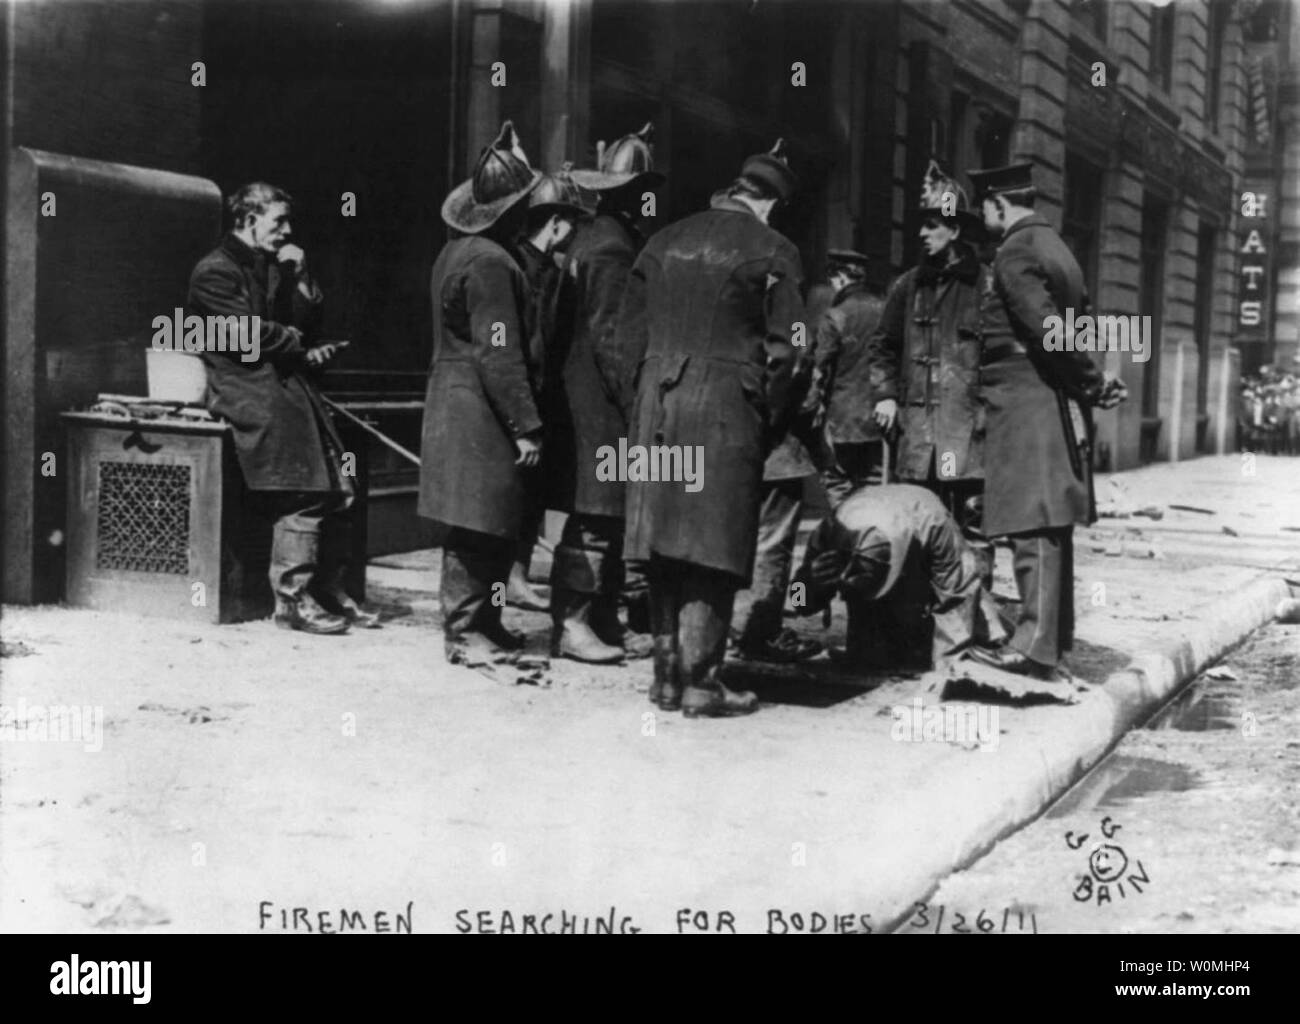 Fire fighters search for bodies which might have fallen through a glass sky light in the sidewalk after the Triangle Shirtwaist Factory fire on March 25, 1911 in New York, New York. March 25, 2011 is the 100th anniversary of the fire when 146 factory workers died after building mangers locked doors leading to all exits. Eye witness accounts by United Press reporter William G. Shepherd along with other reports during the following days and weeks brought the conditions of garment worker into public scrutiny.   UPI/Cornell University Stock Photo